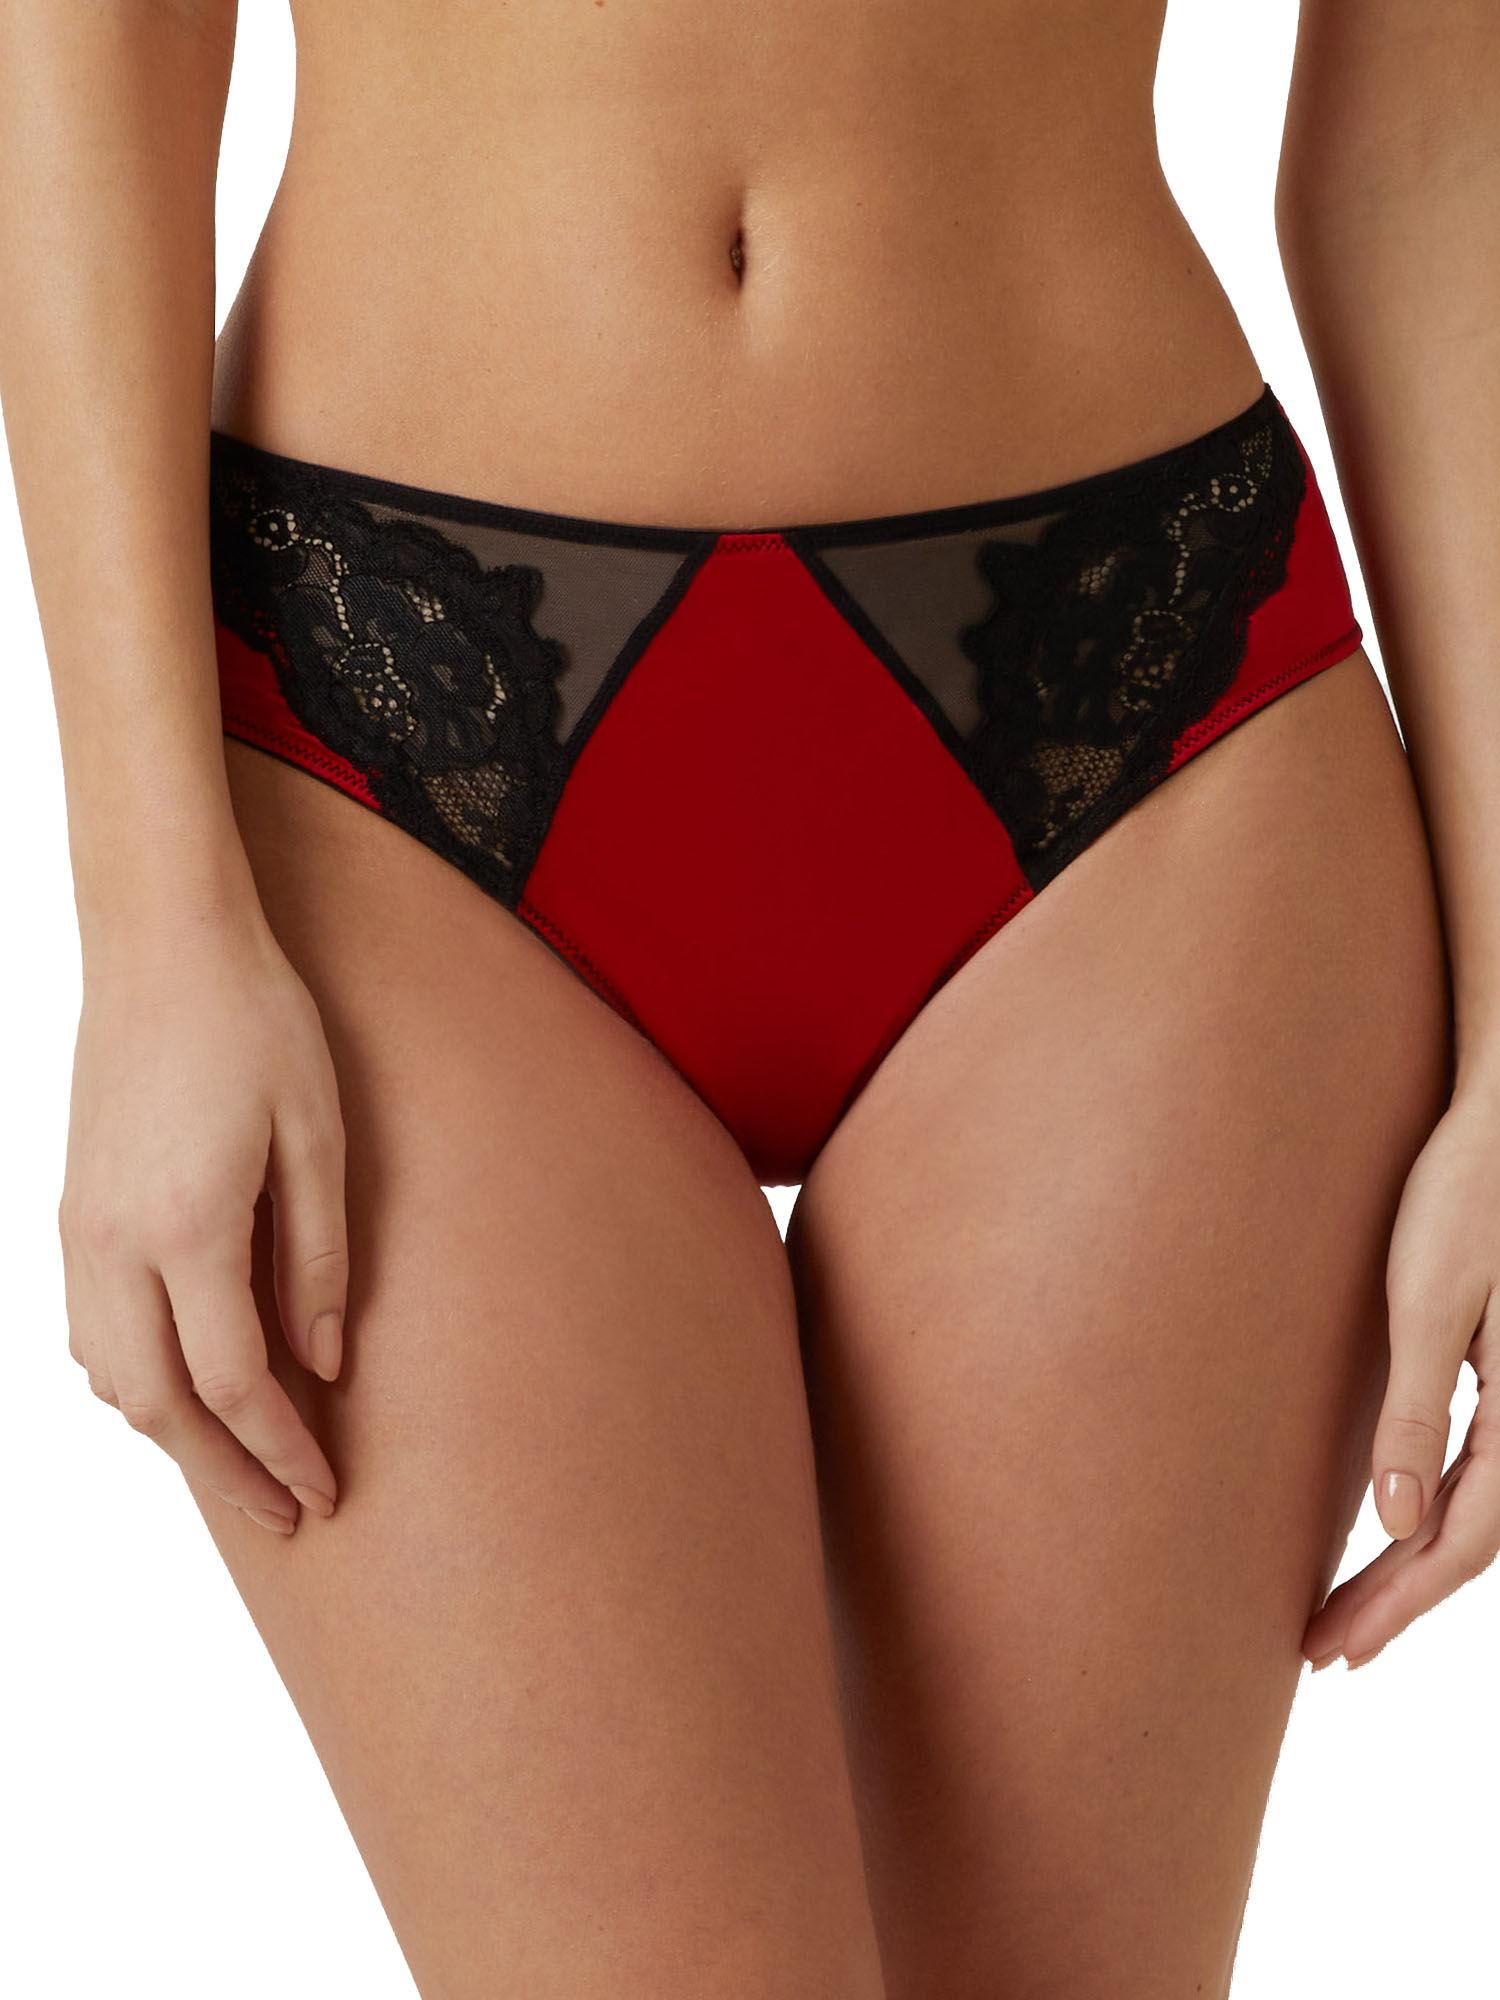 black and red bridal festival culotte thong panty multi-color